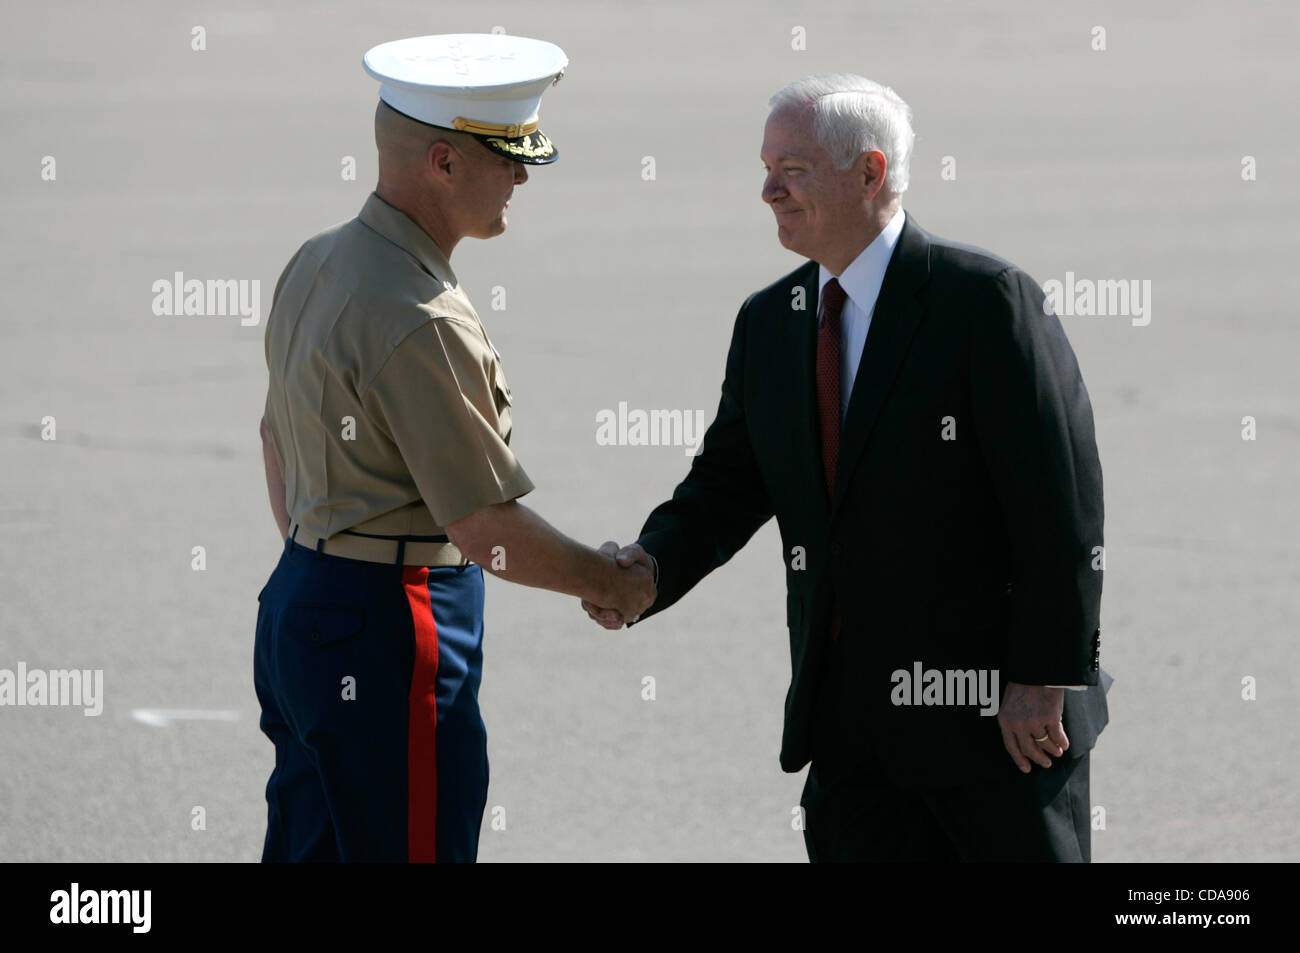 Aug. 13, 2010 - San Diego, California, USA - Friday August, 13th 2010- Marine Corps Recruit Depot, San Diego, CA USA- Secretary of Defense Robert Gates shakes hands with LT. COL. Thomas McCann following an award ceremony for the top Marines following a Basic Marine Graduation Ceremony. Gates also vi Stock Photo